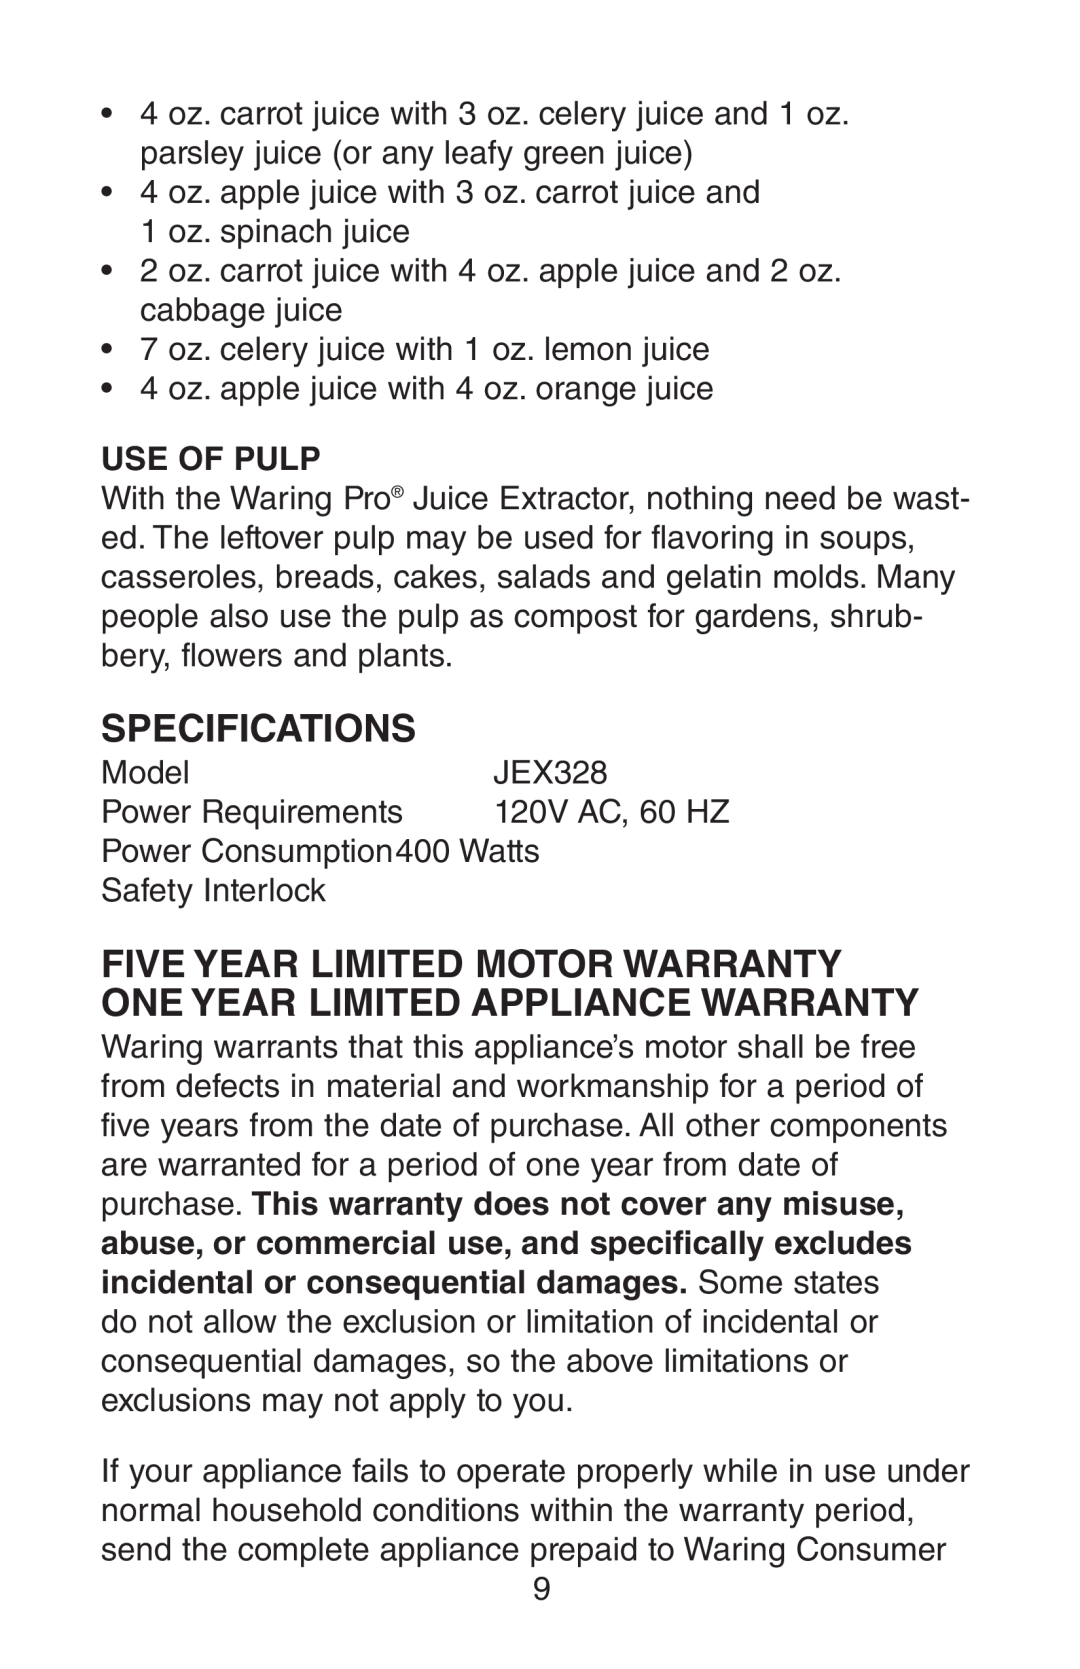 Waring JEX328 manual Specifications, Use Of Pulp 